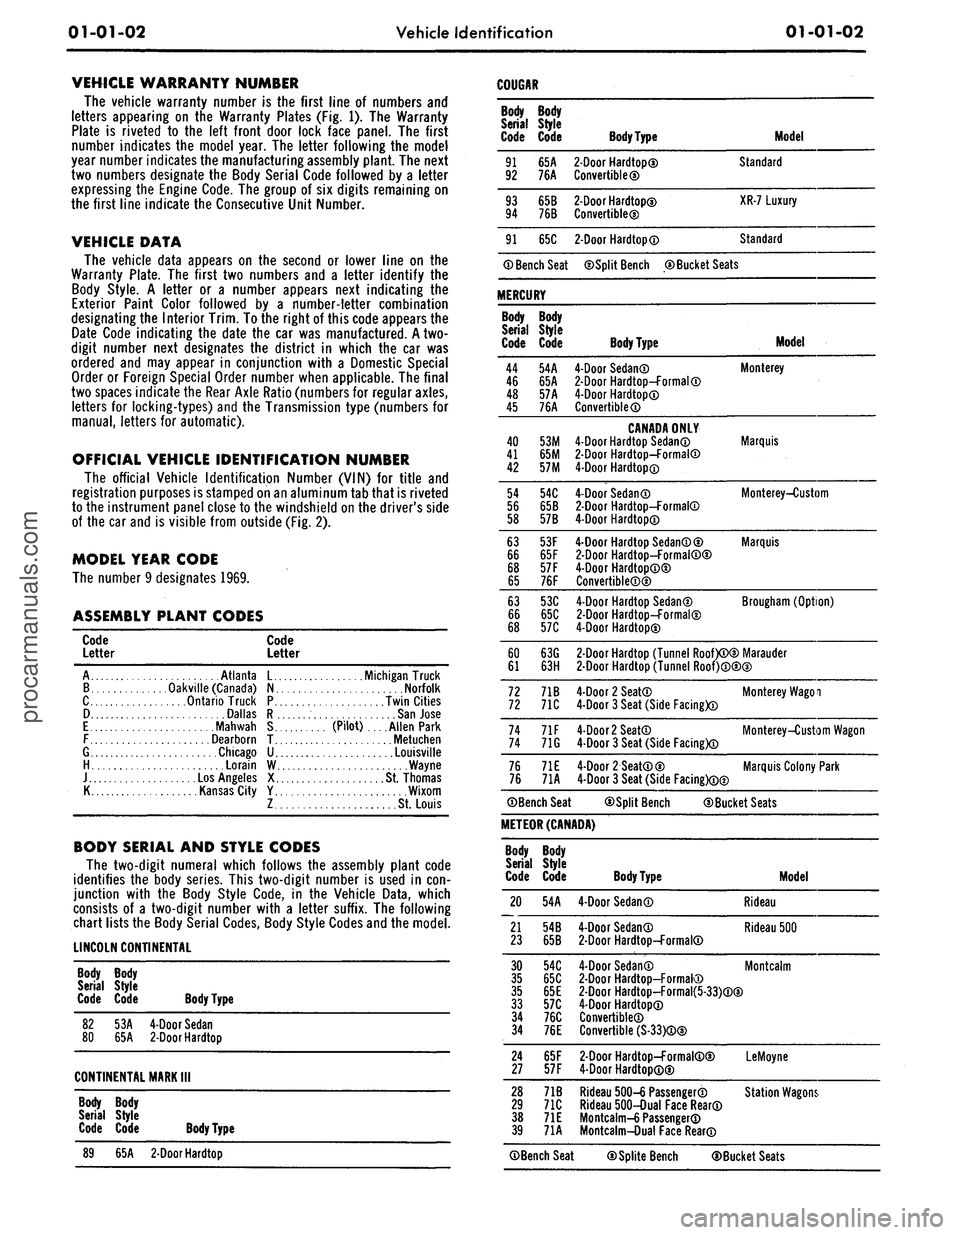 FORD MUSTANG 1969  Volume One Chassis 
01-01-02 
Vehicle Identification 
01-01-02

VEHICLE WARRANTY NUMBER

The vehicle warranty number is the first line of numbers and

letters appearing on the Warranty Plates (Fig. 1). The Warranty

Pla